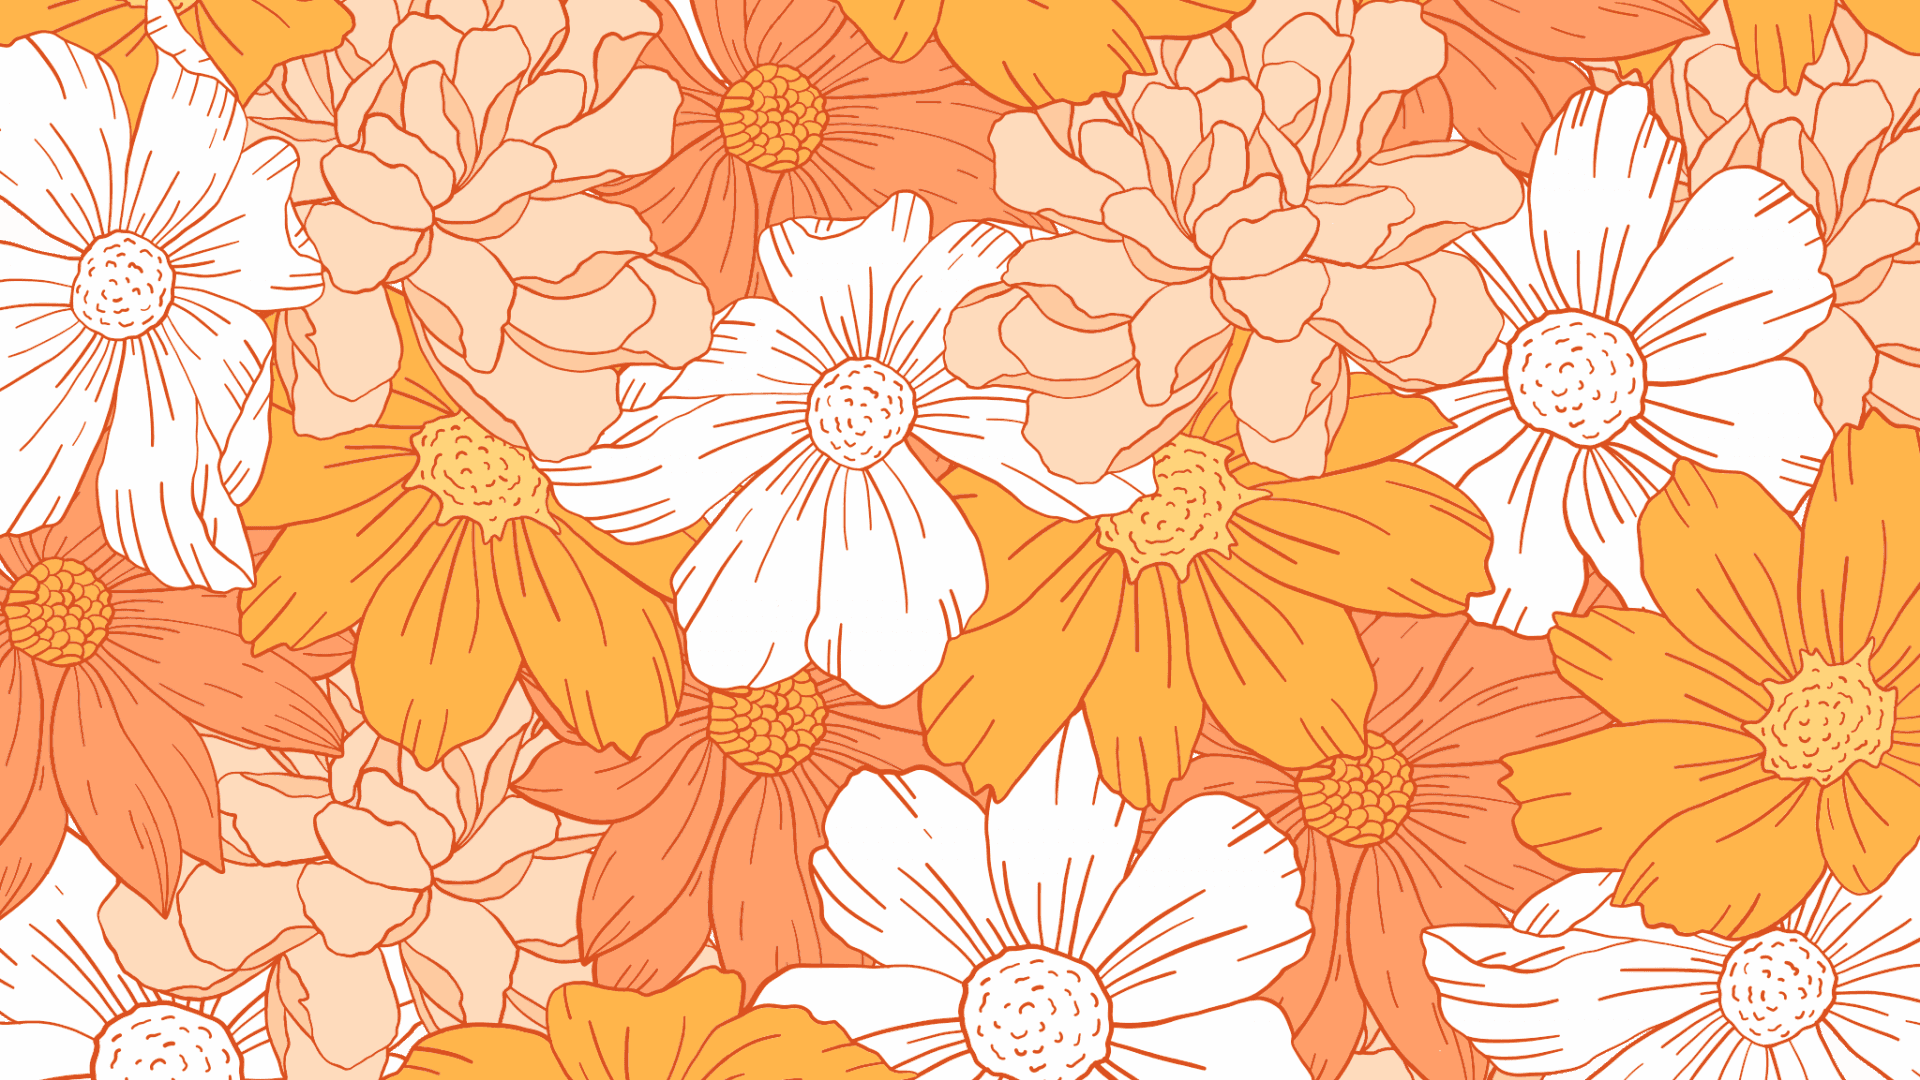 A Floral Pattern With Orange And White Flowers